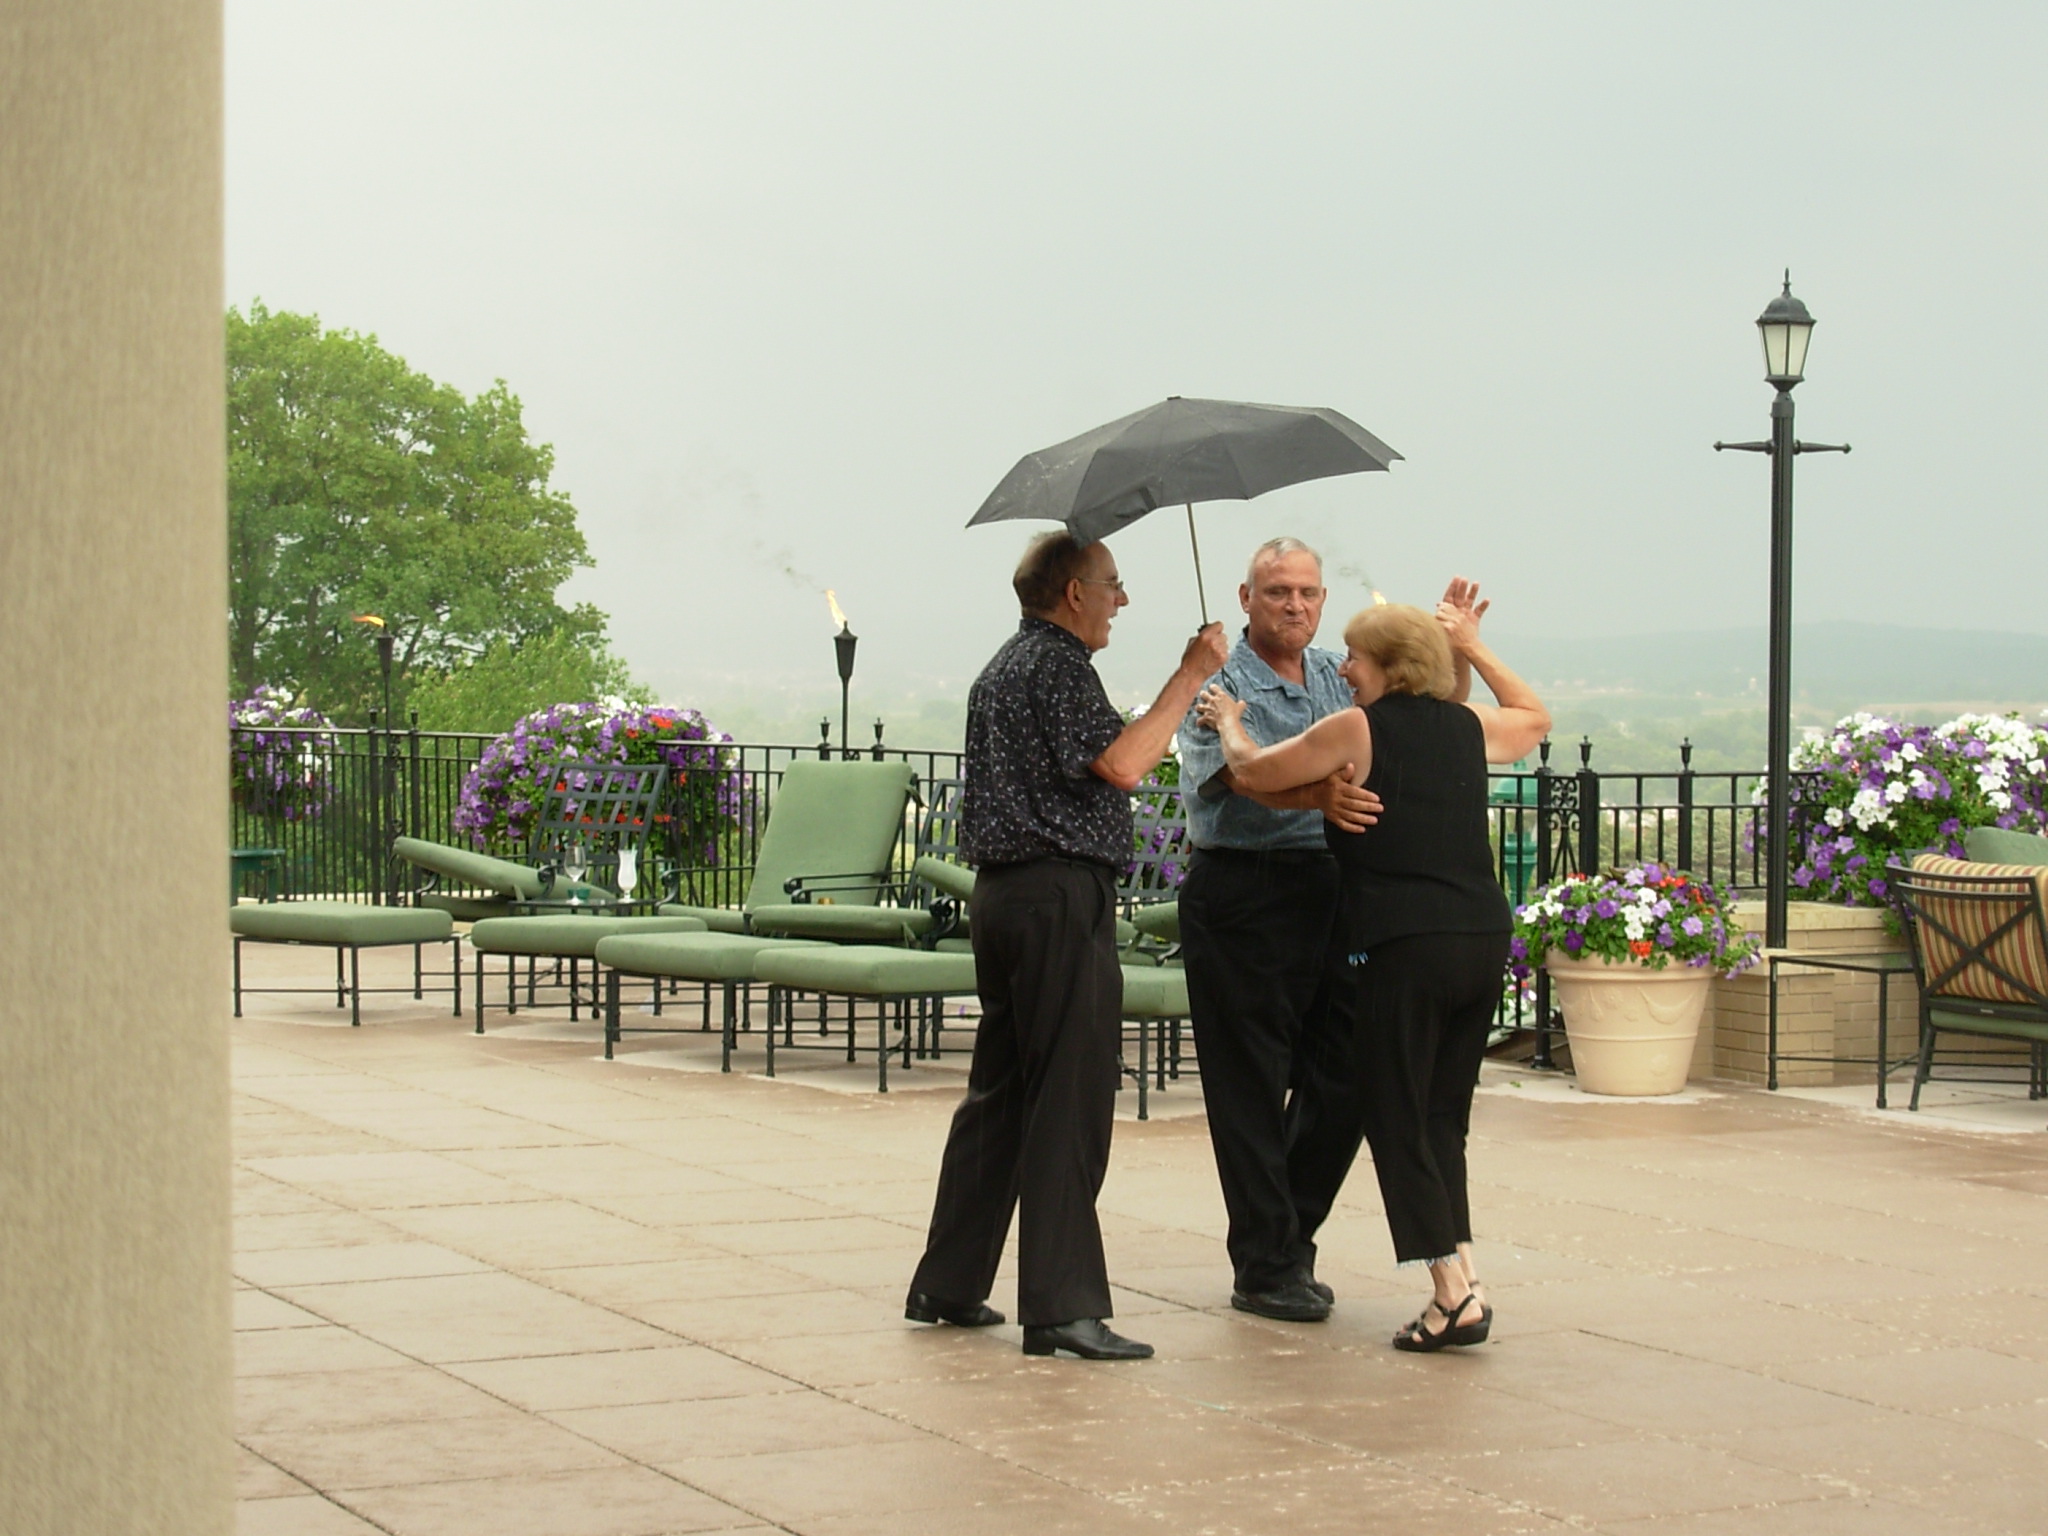 Rain doesn't even stop the dancing at the Hotel Hershey
